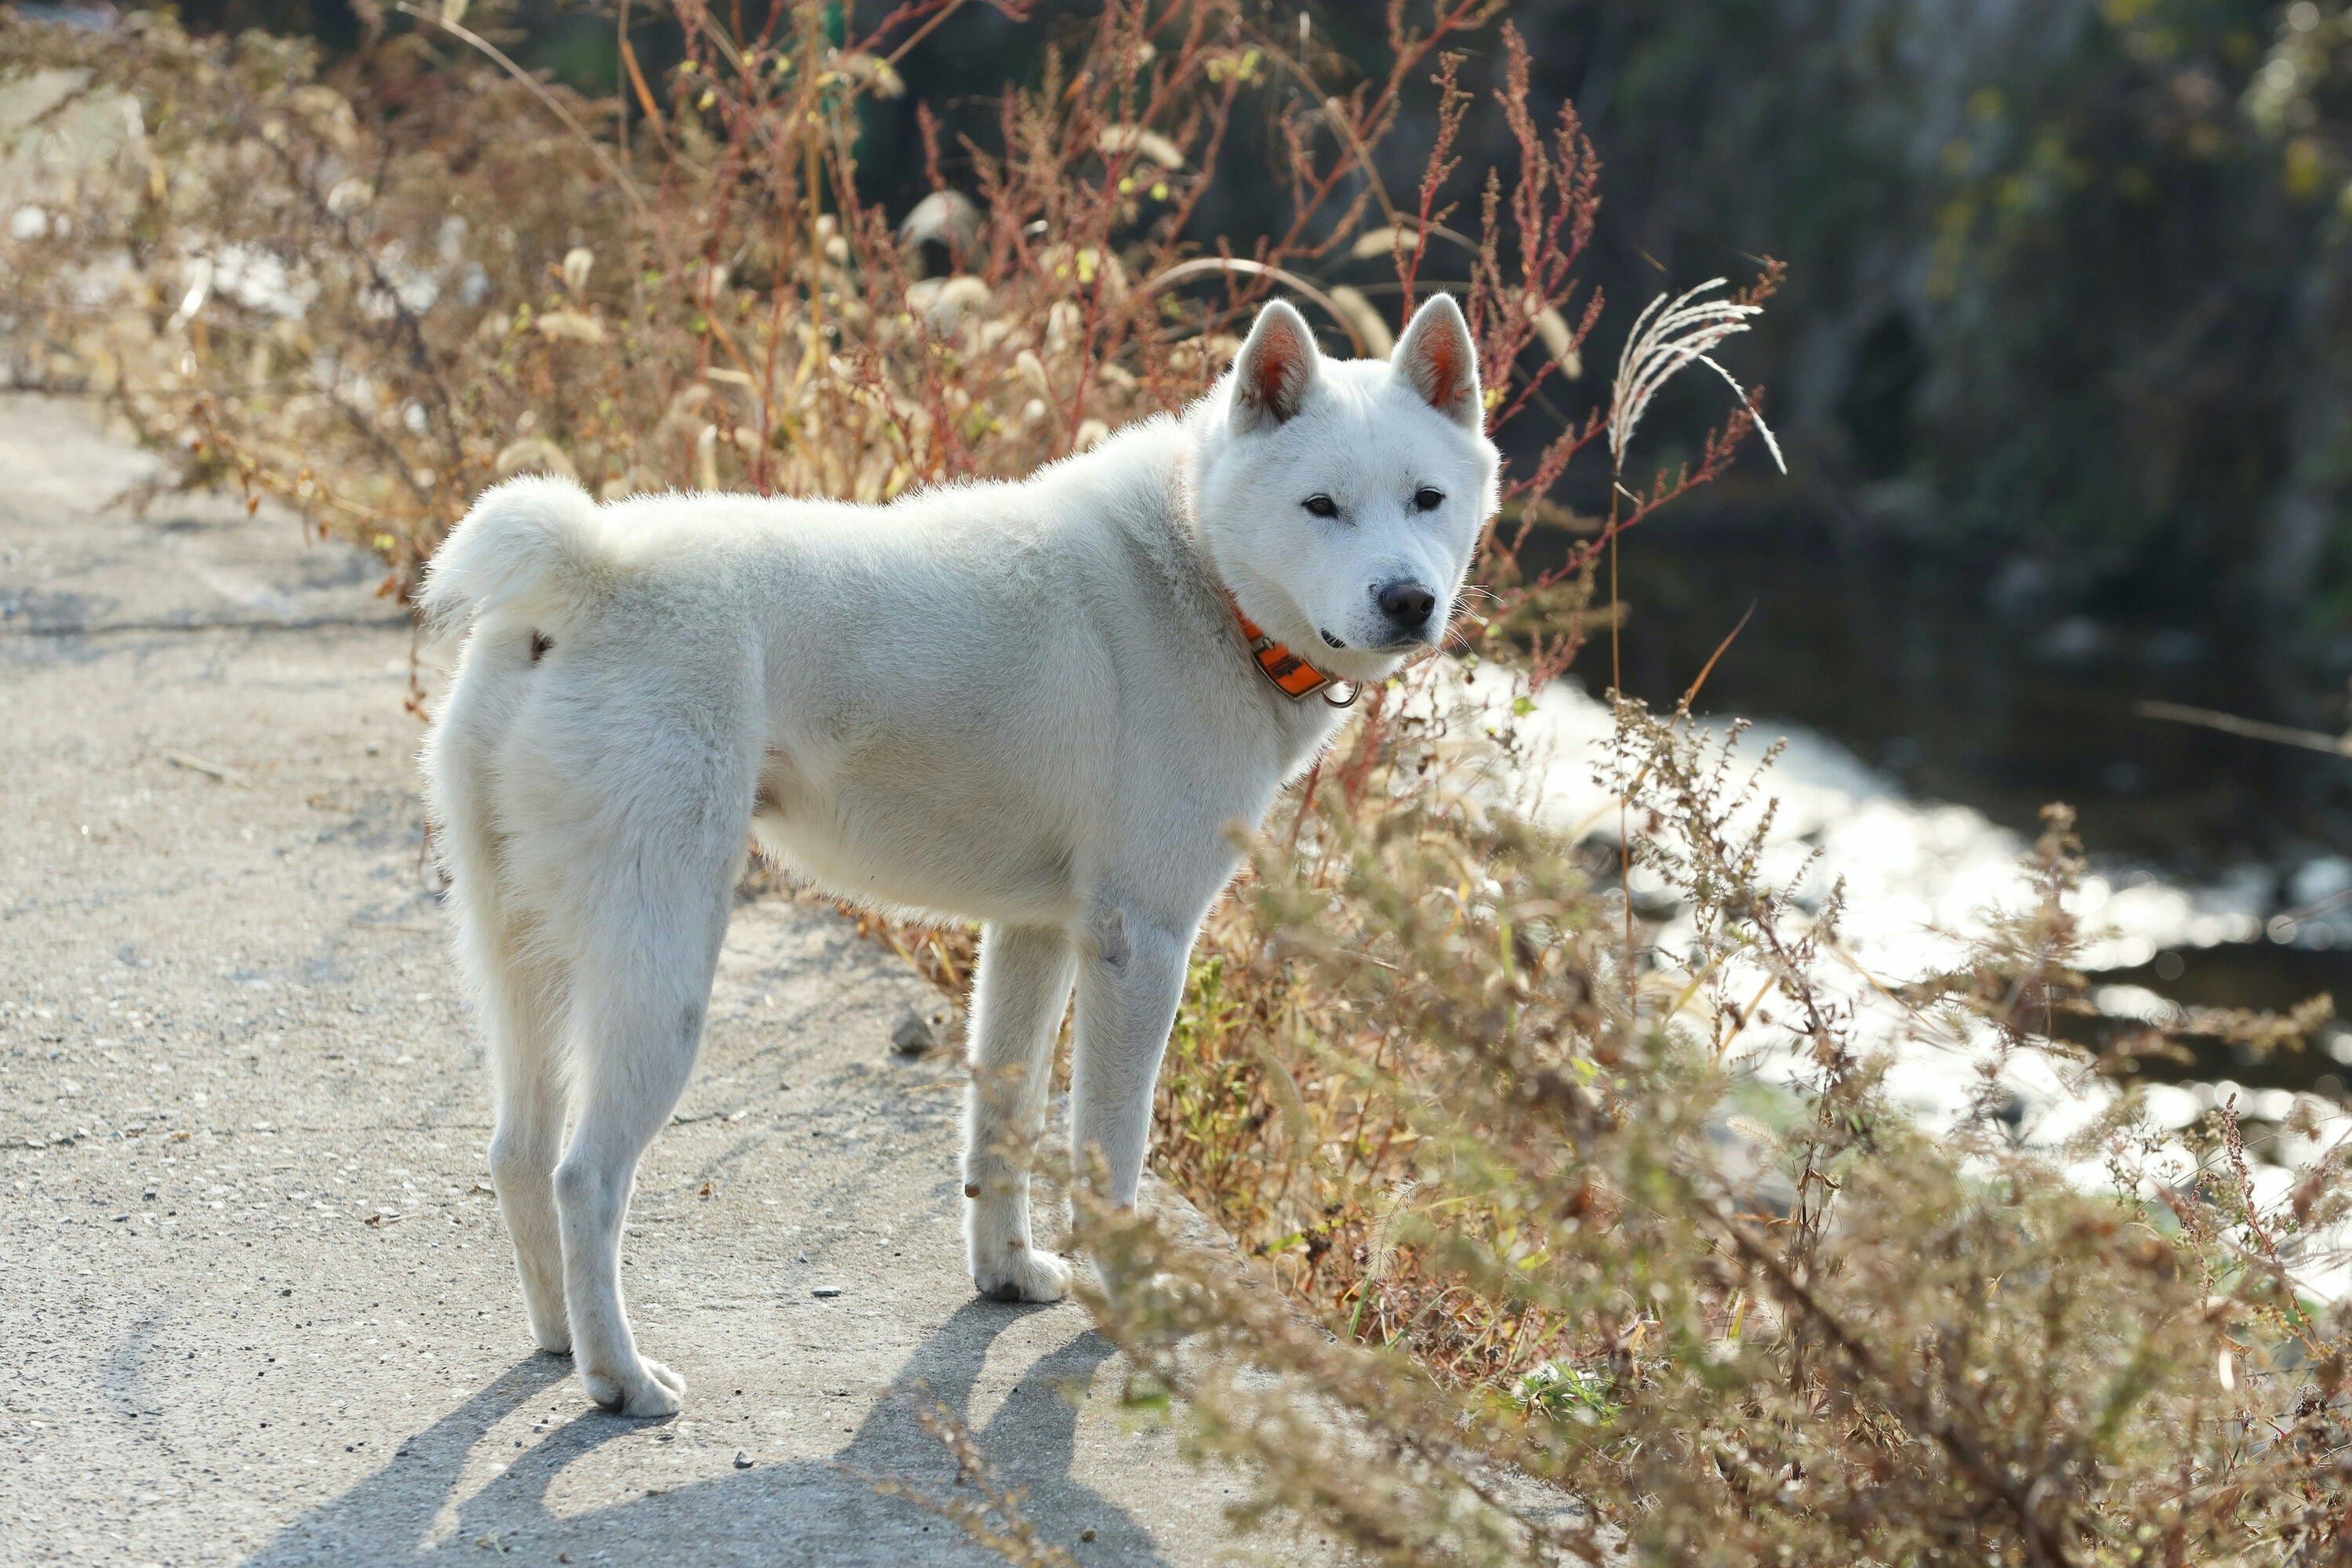 A Donggyeongyi Dog named Seok-dol, a Korea's natural monument number 540, is pictured in Gyeongju, North Gyeongsang province, Korea.